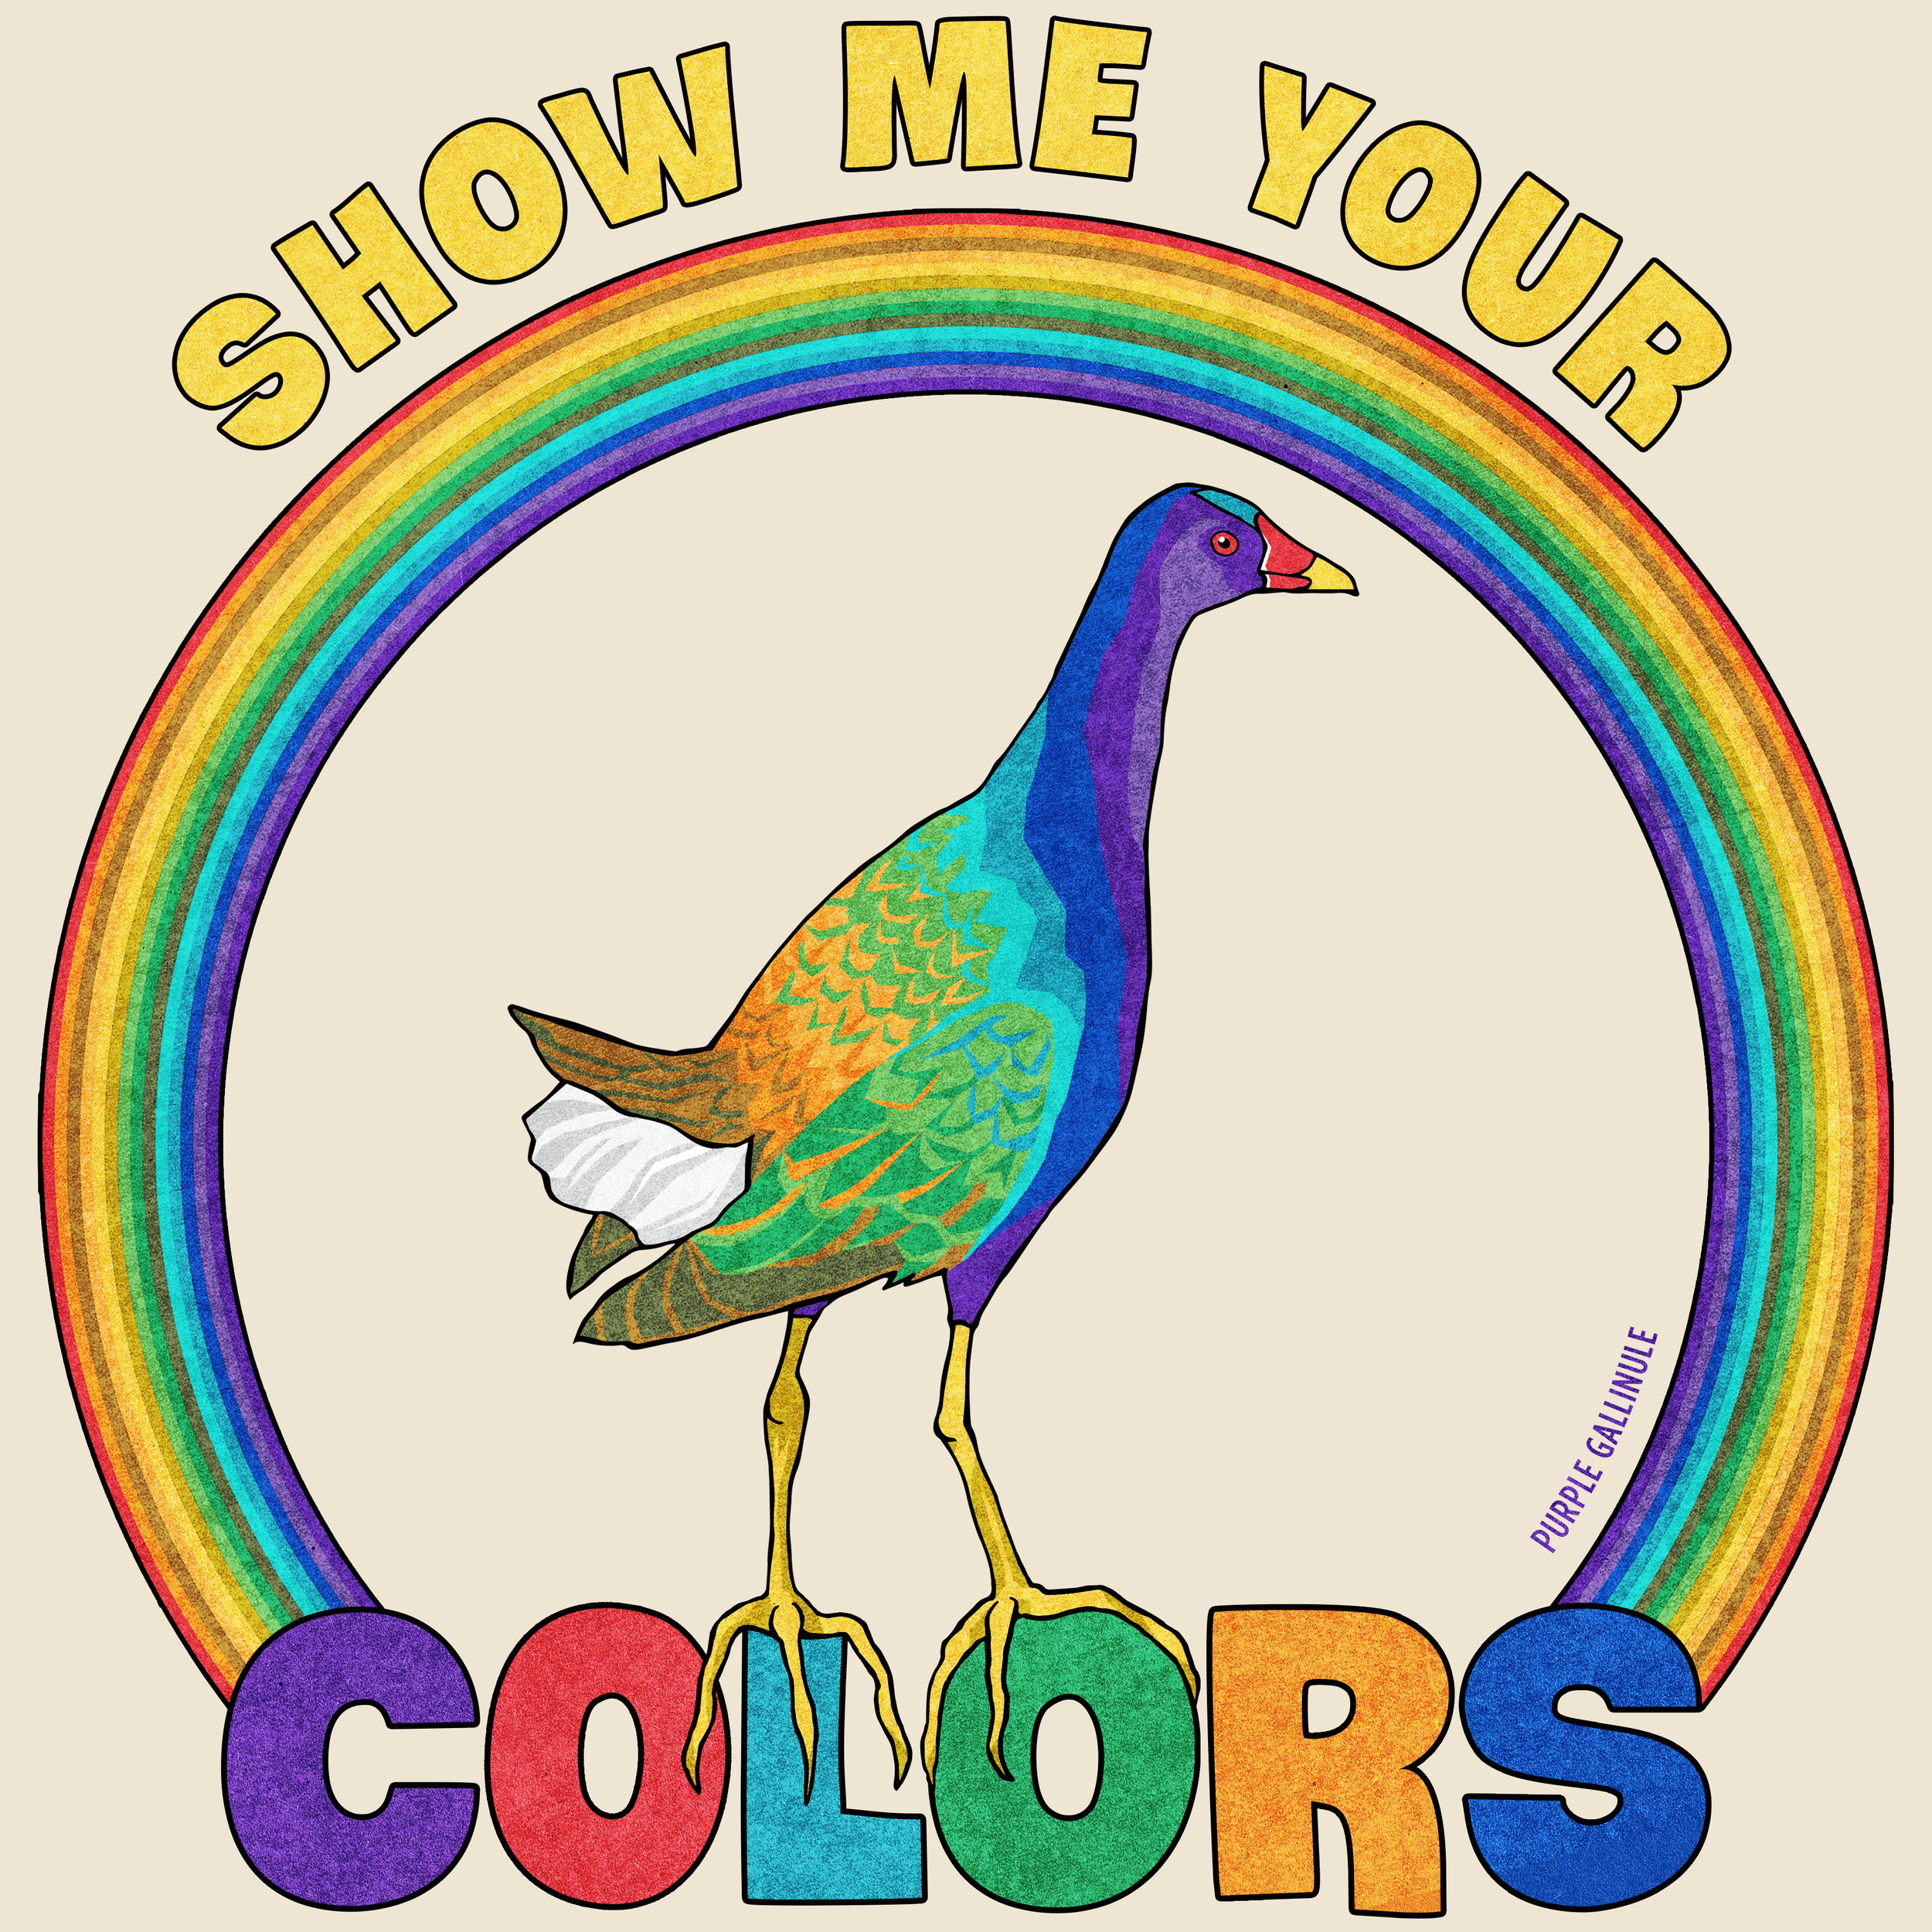 "Show Me Your Colors" Pride tee design